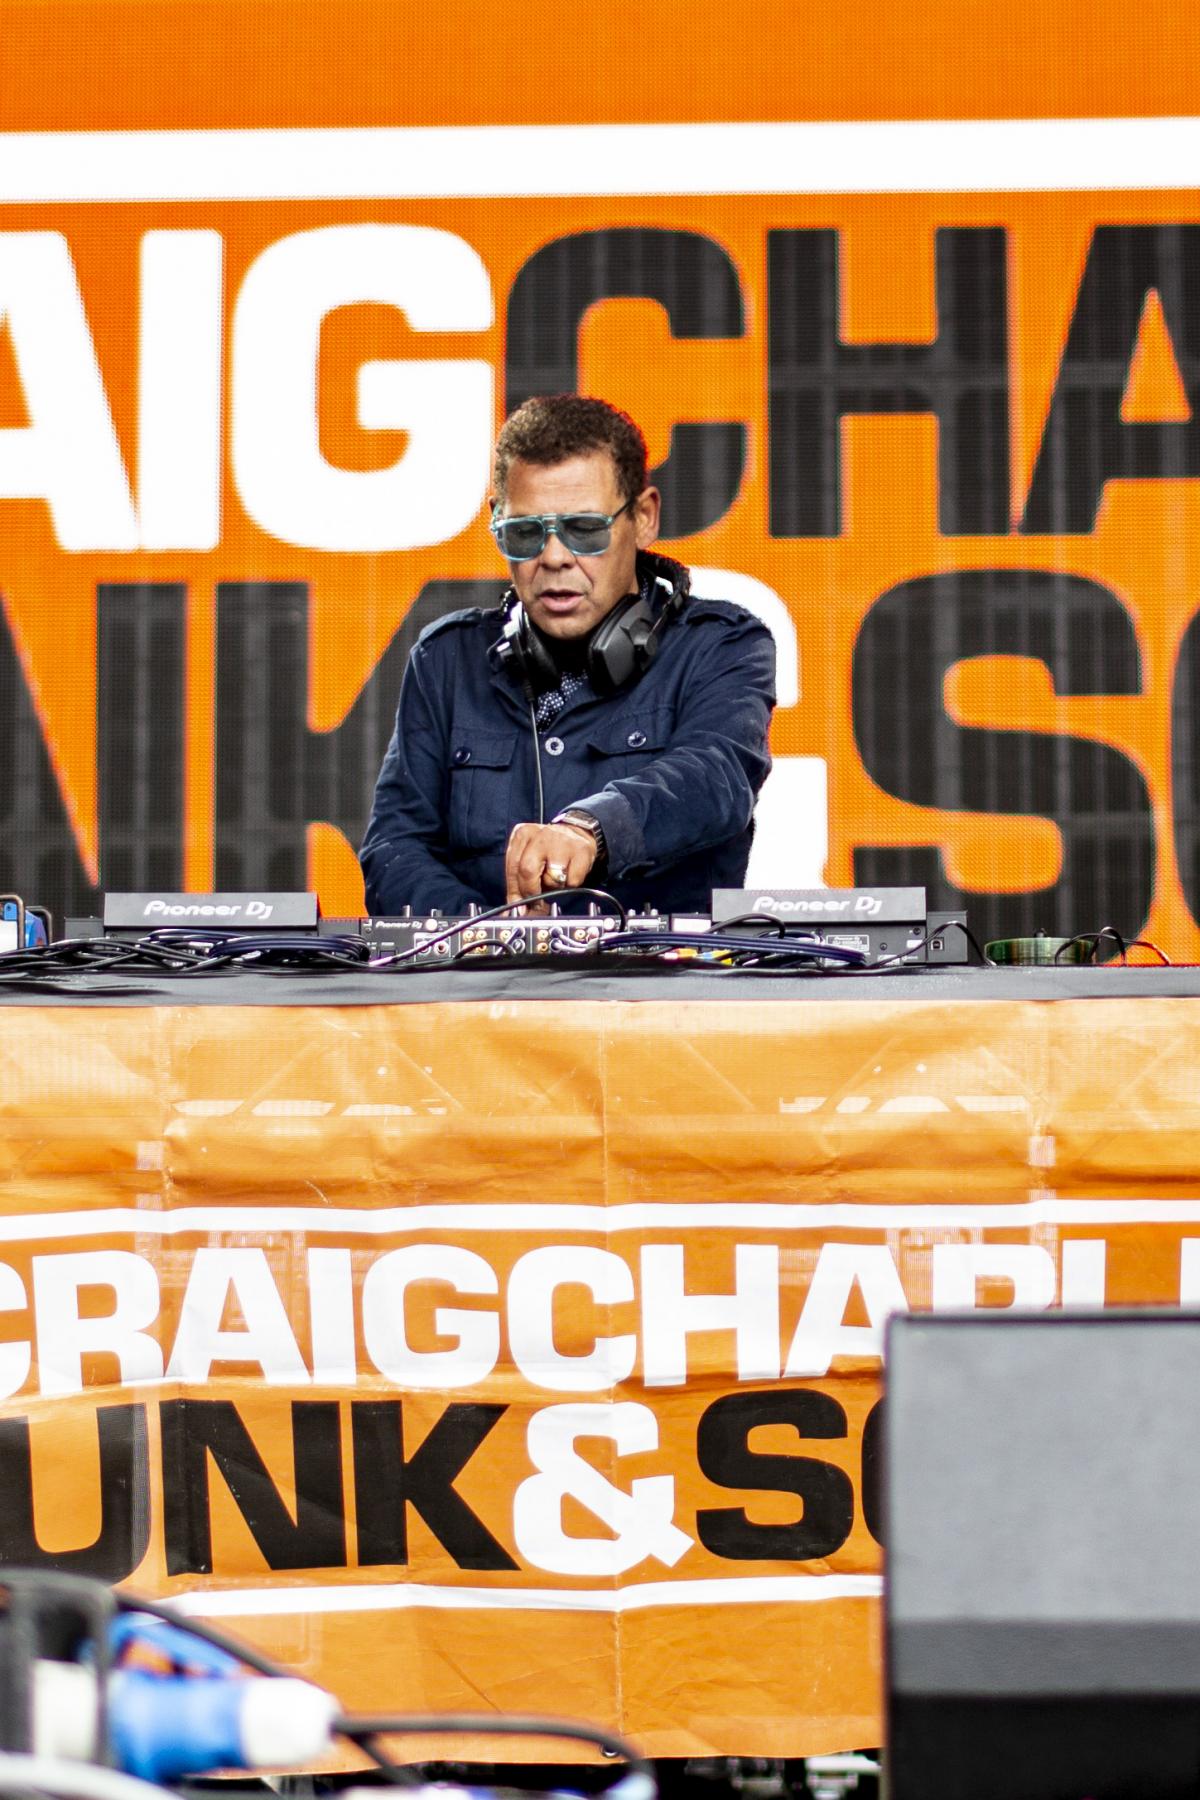 Pictures from Camp Bestival 2021 at Lulworth Castle.  Photos of Craig Charles by rockstarimages.co.uk. 